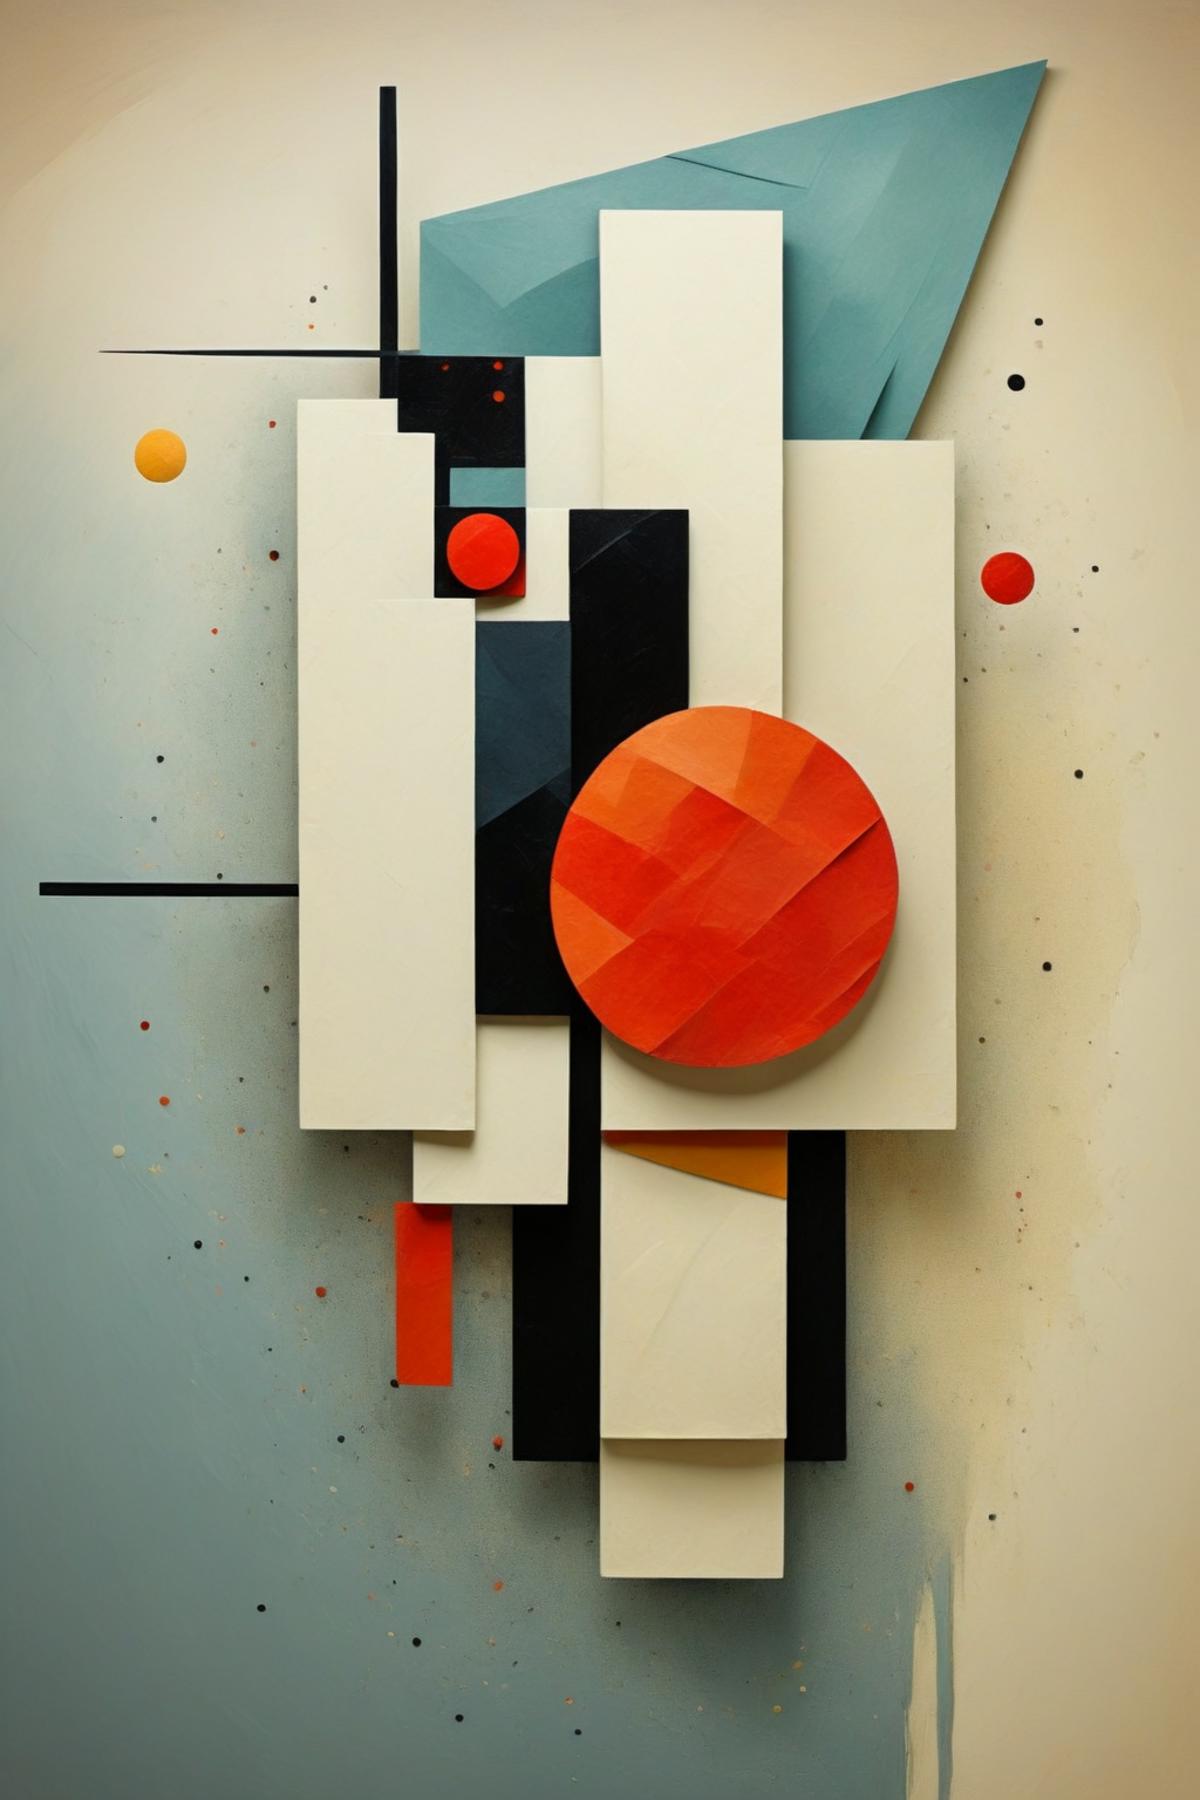 FF Style: Kazimir Malevich |  Suprematism image by CHINGEL